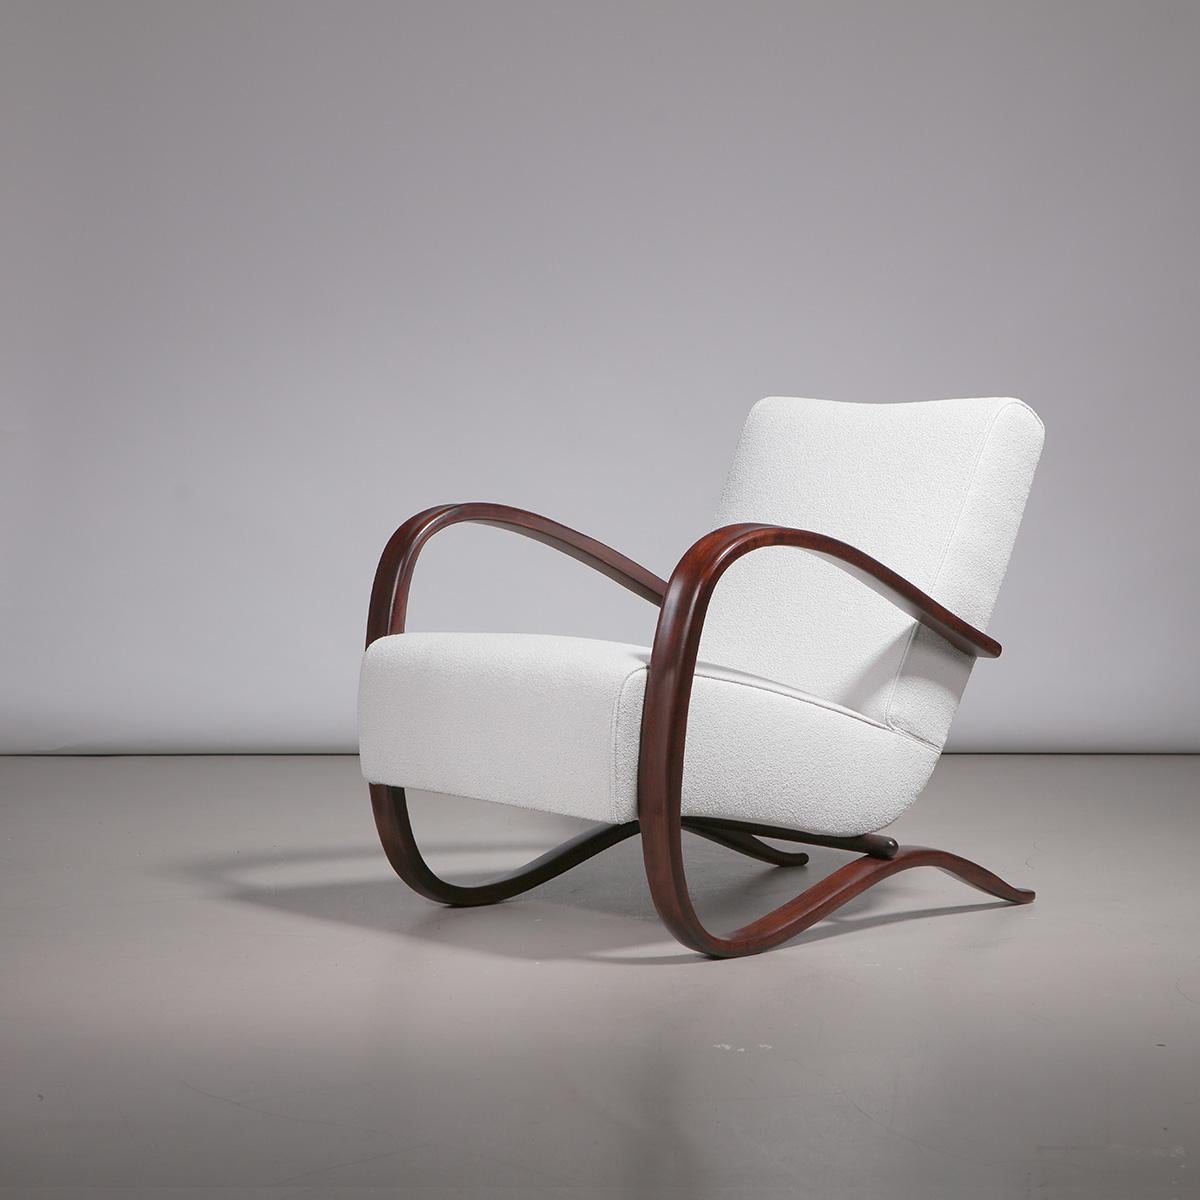 Lounge chair in wood and cream fabric, model 